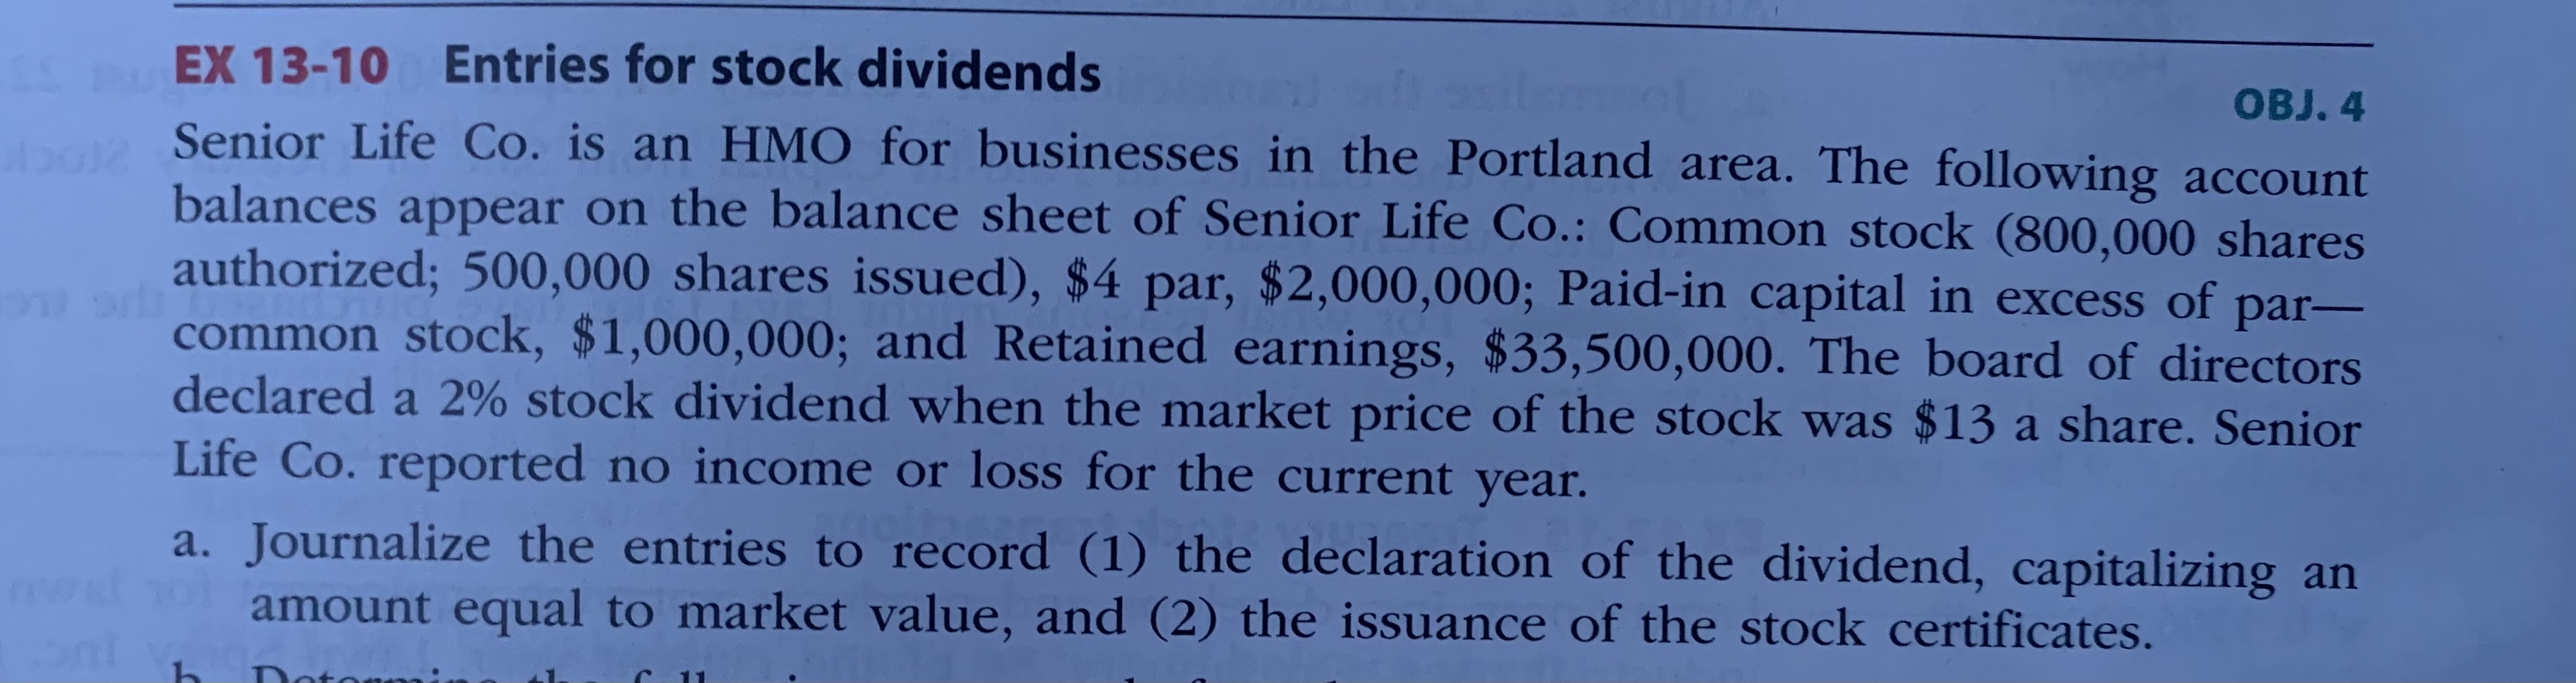 4
Senior Life Co. is an HMO for businesses in the Portland area. The following account
balances appear on the balance sheet of Senior Life Co.: Common stock (800,000 shares
orta
authorized; 500,000 shares issued), $4 par, $2,000,000; 

<div class=